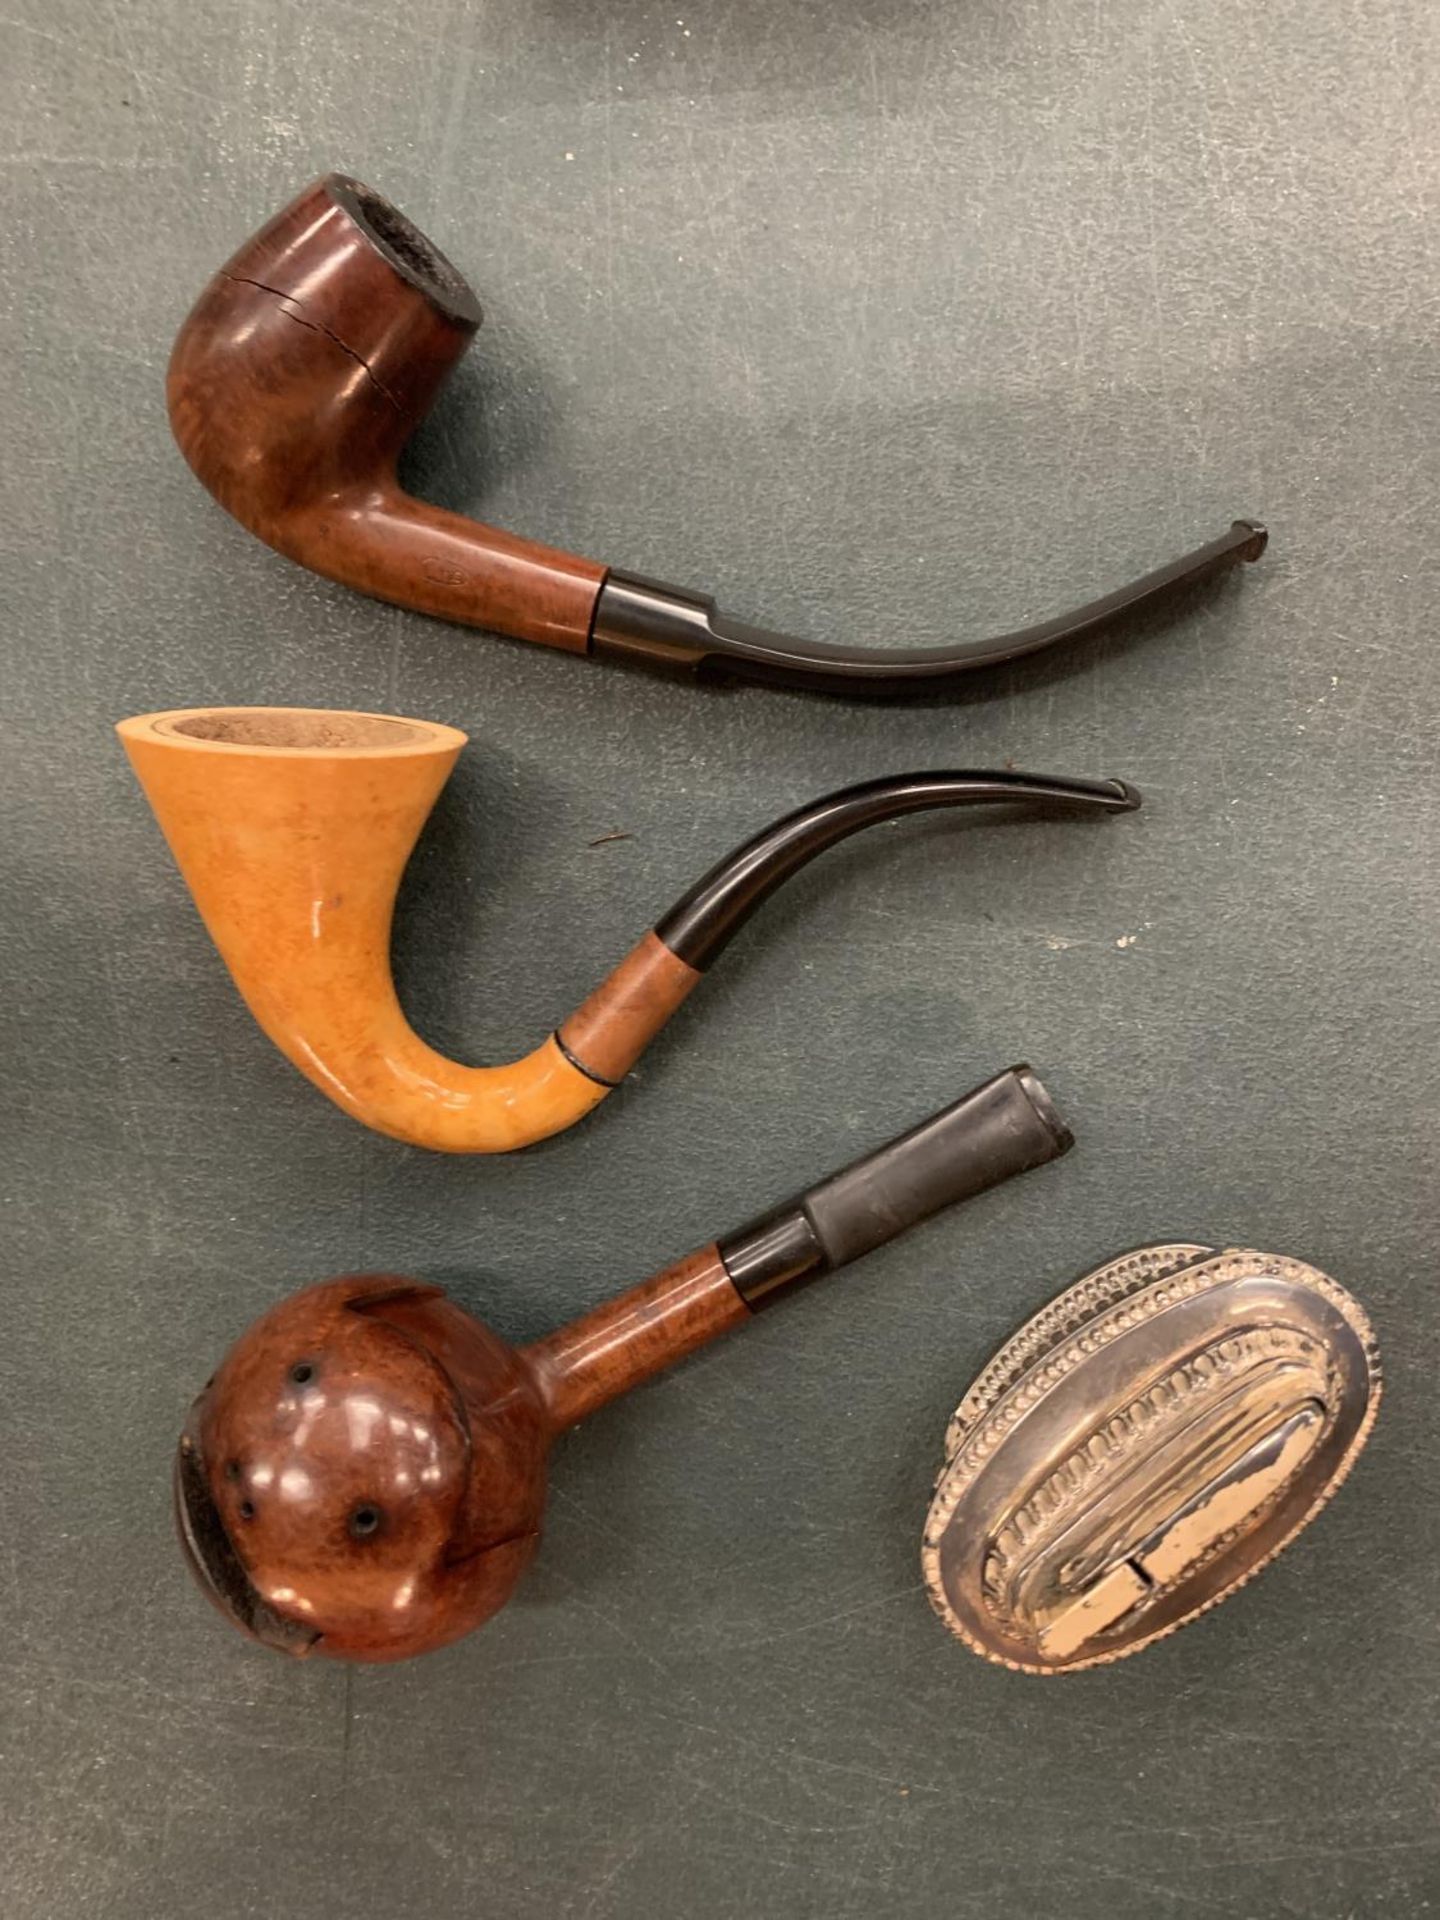 A VINTAGE BURL WOOD HURRICANE PIPE, A WOLF OF LONDON SHERLOCK HOLMES PIPE, A FURTHER EXAMPLE AND A